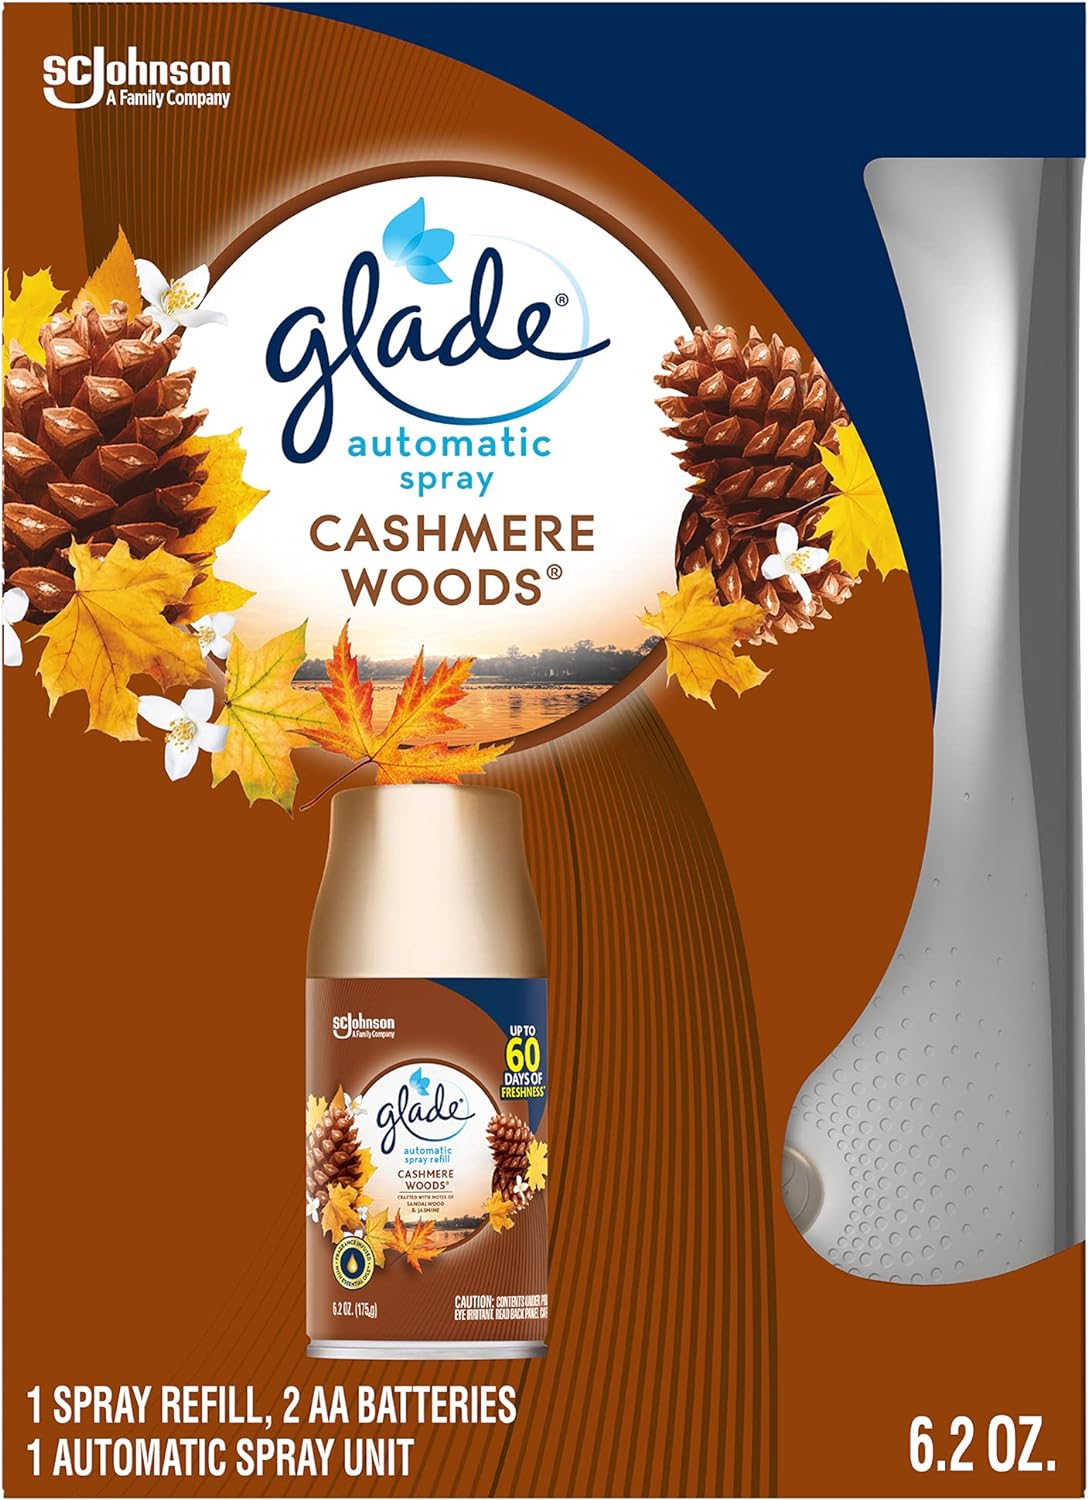 Glade Automatic Spray Refill and Holder Kit, Air Freshener for Home and Bathroom, Cashmere Woods, 6.2 Oz